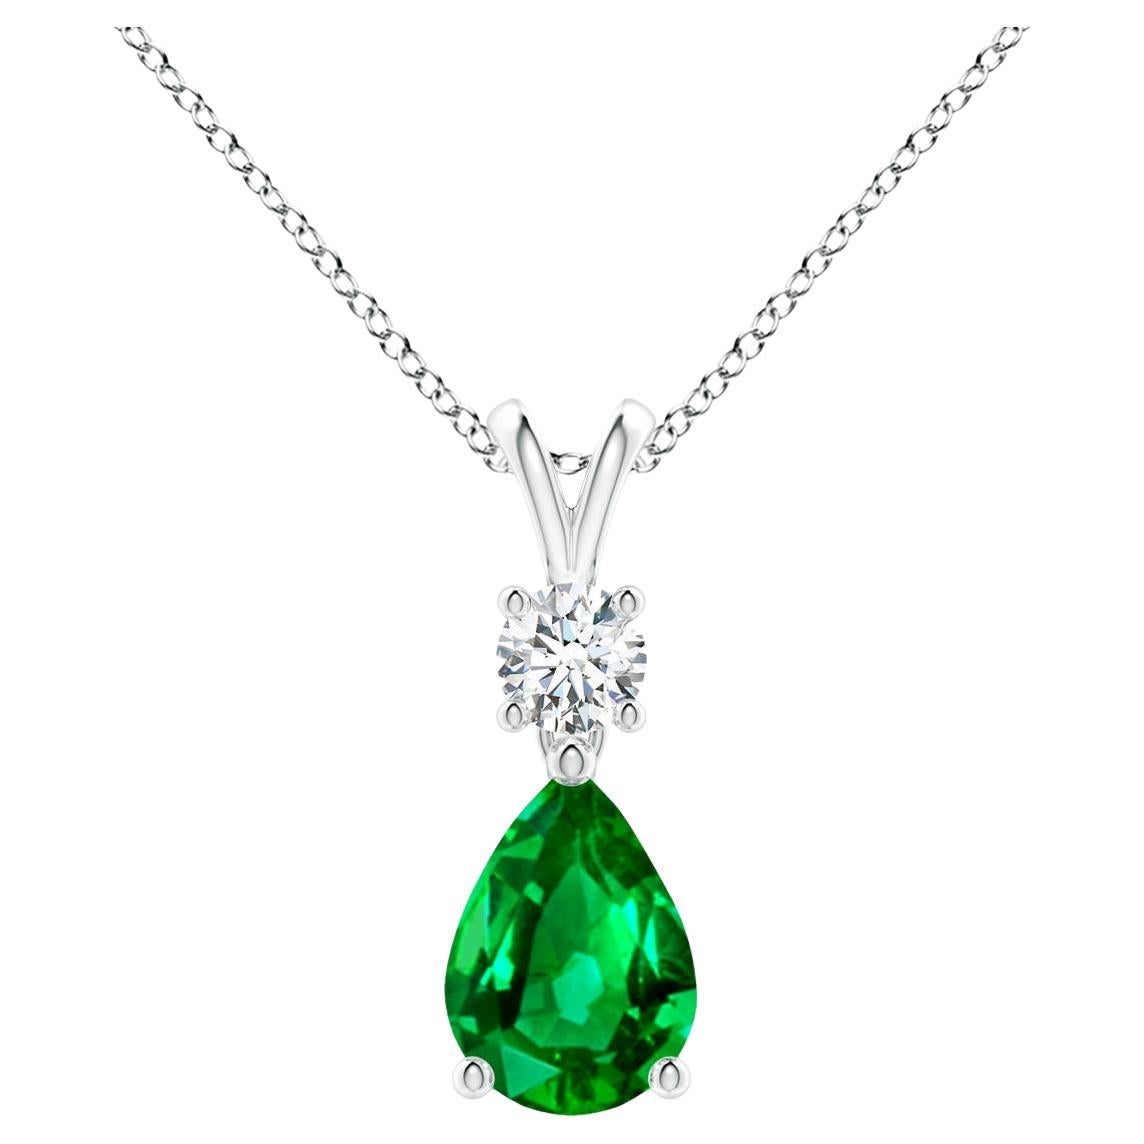 Natural Pear-Shaped Emerald V-Bale Pendant in 14K White Gold Size-7x5mm